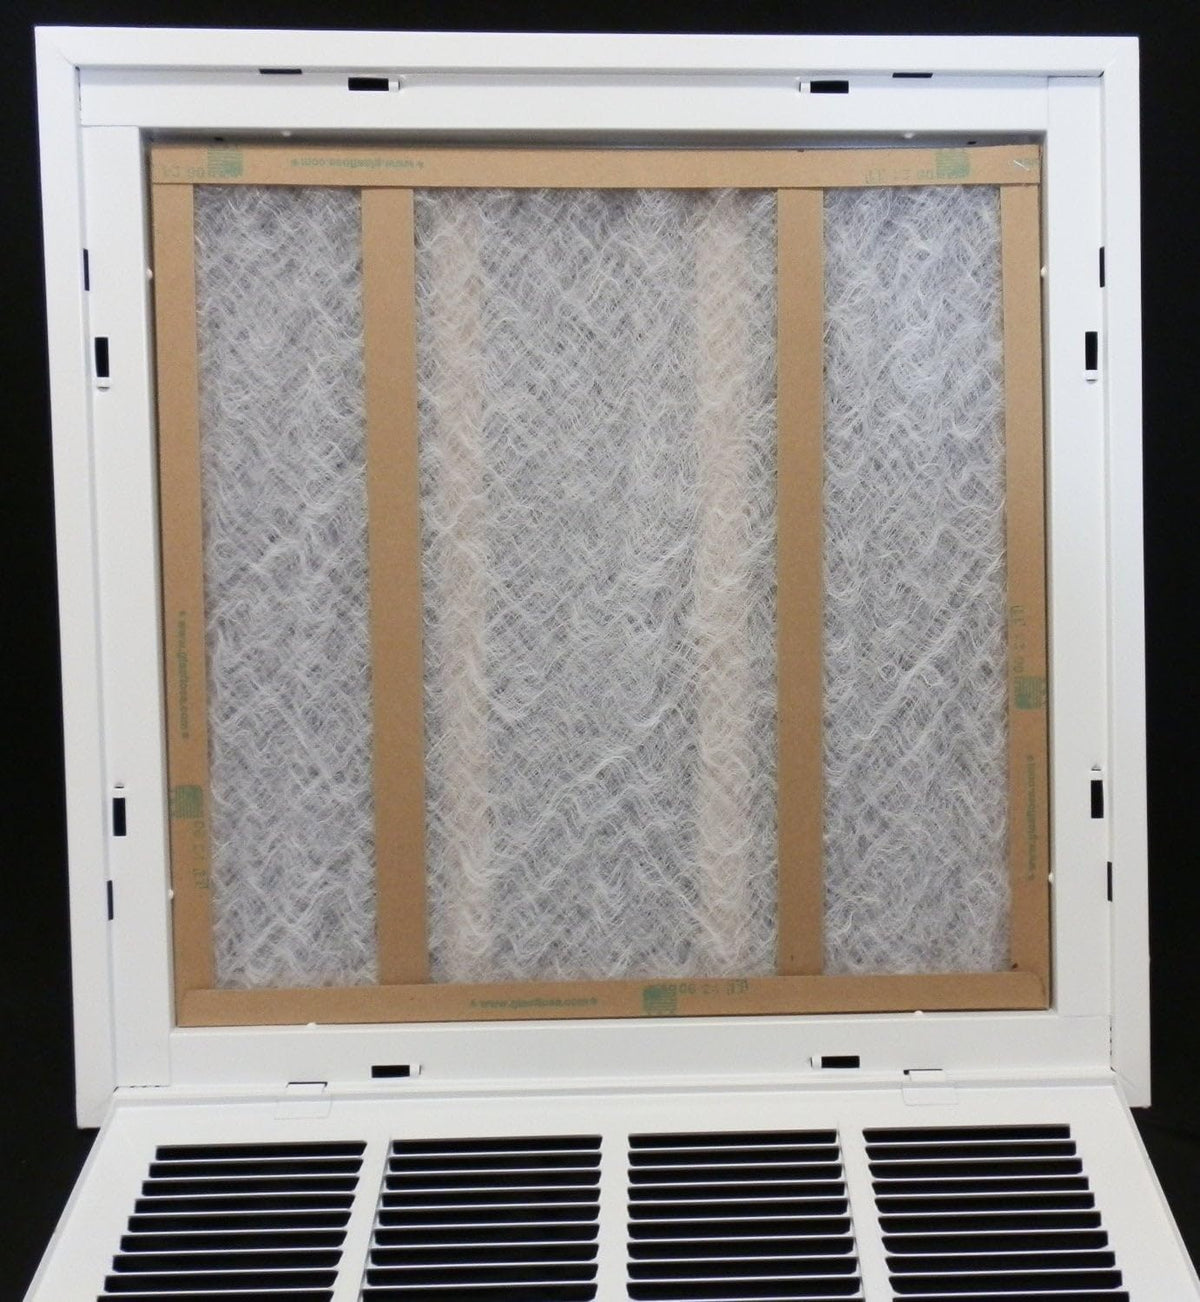 8&quot; X 18&quot; Steel Return Air Filter Grille for 1&quot; Filter - Removable Frame - [Outer Dimensions: 10 5/8&quot; X 20 5/8&quot;]